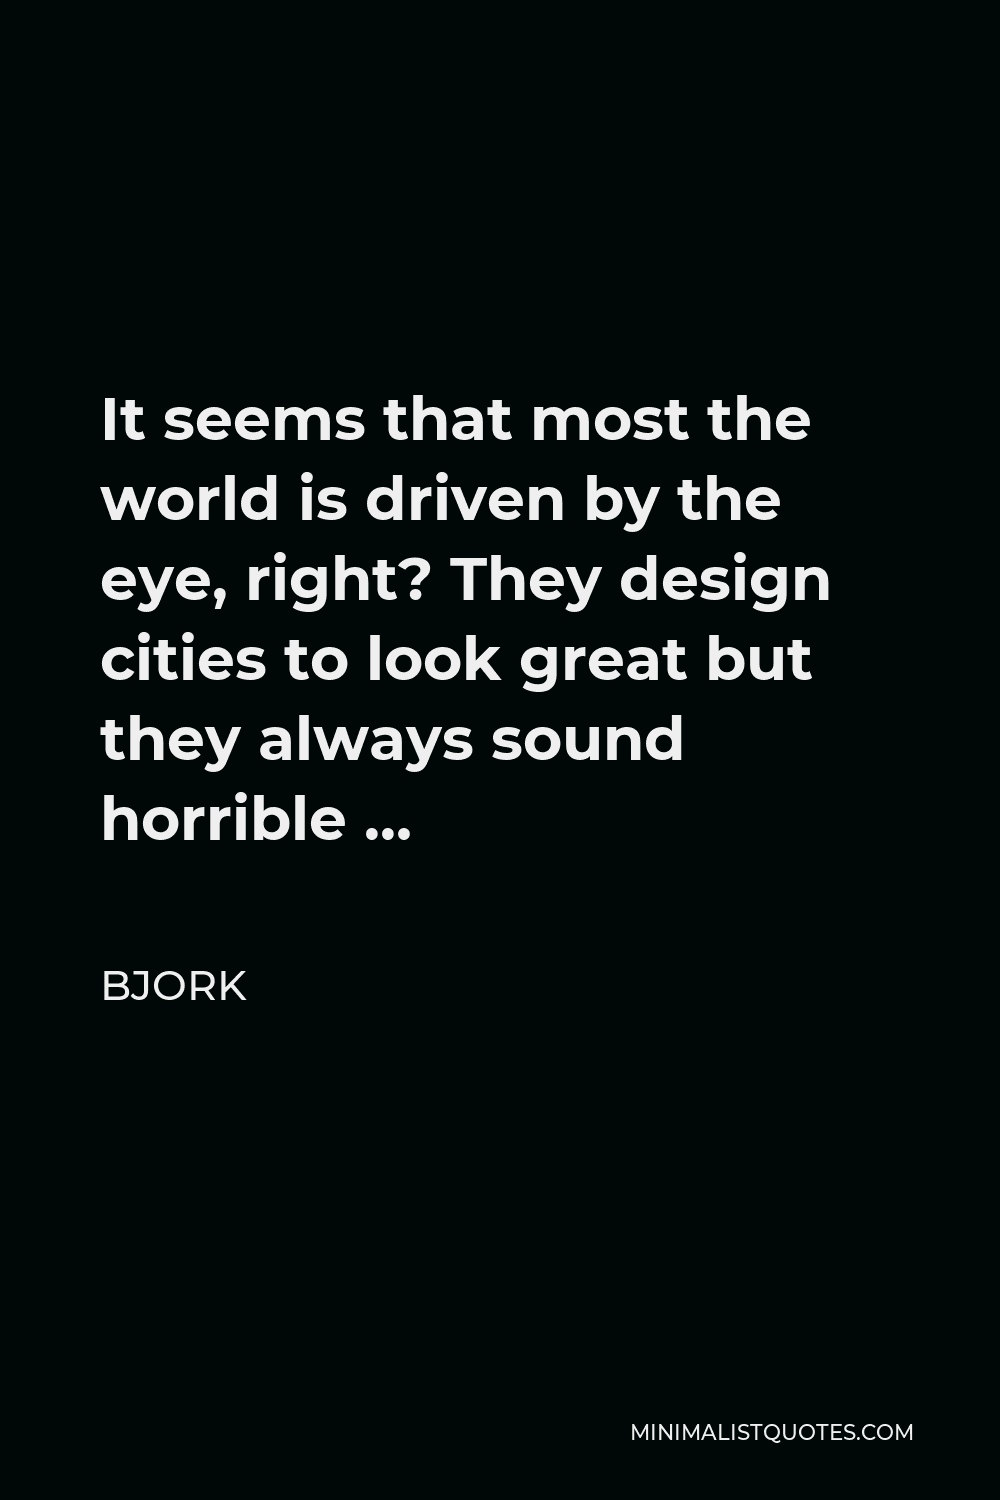 Bjork Quote - It seems that most the world is driven by the eye, right? They design cities to look great but they always sound horrible …